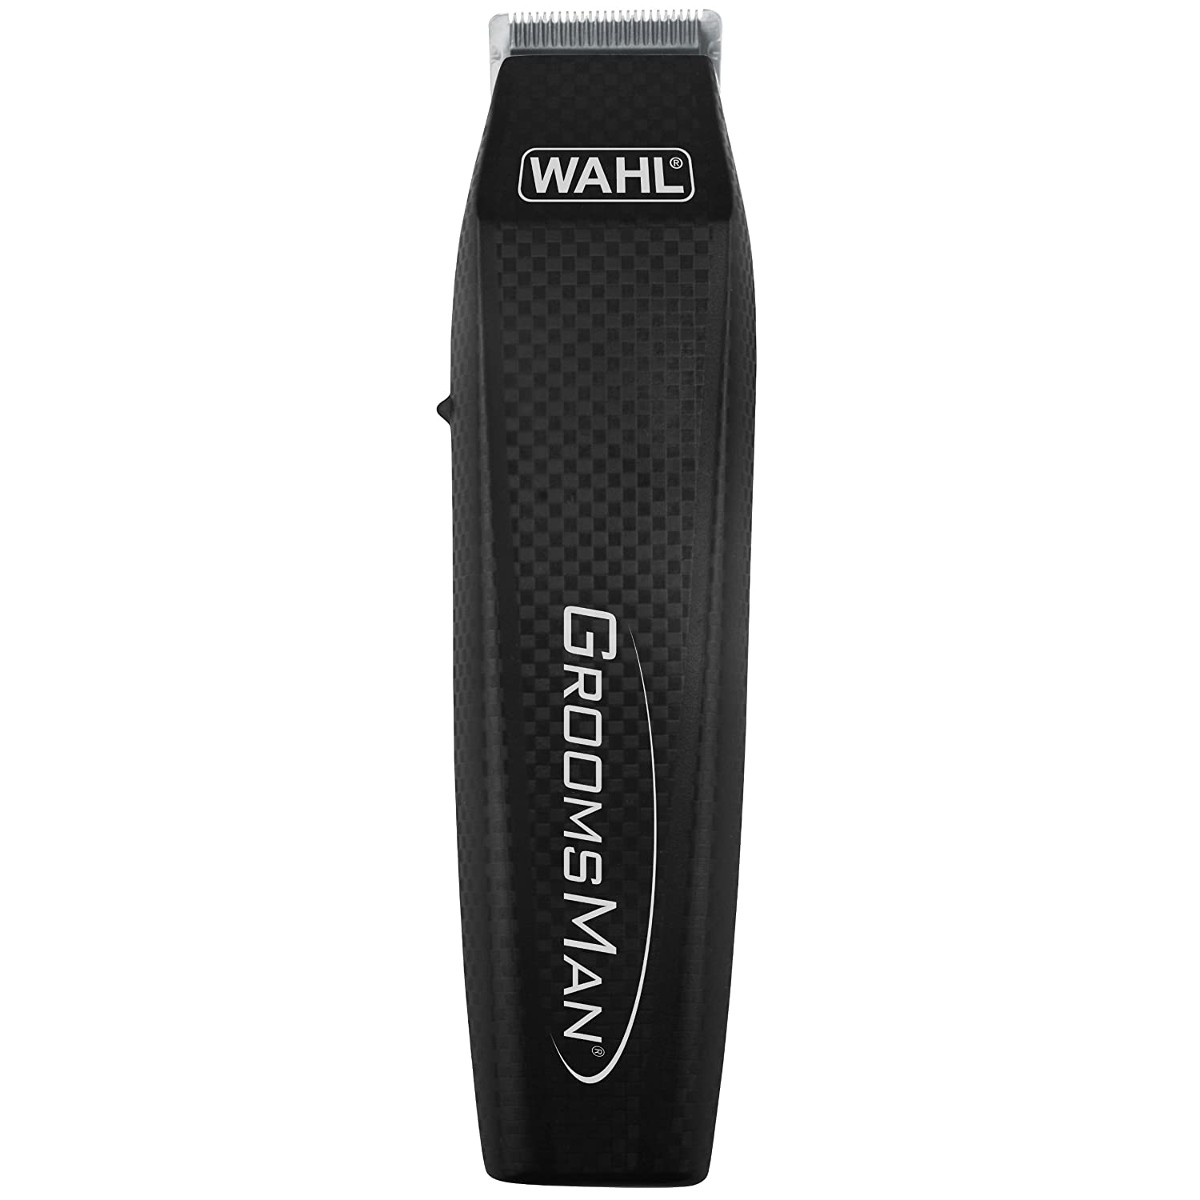 Wahl Groomsman Battery All-In-One Trimer